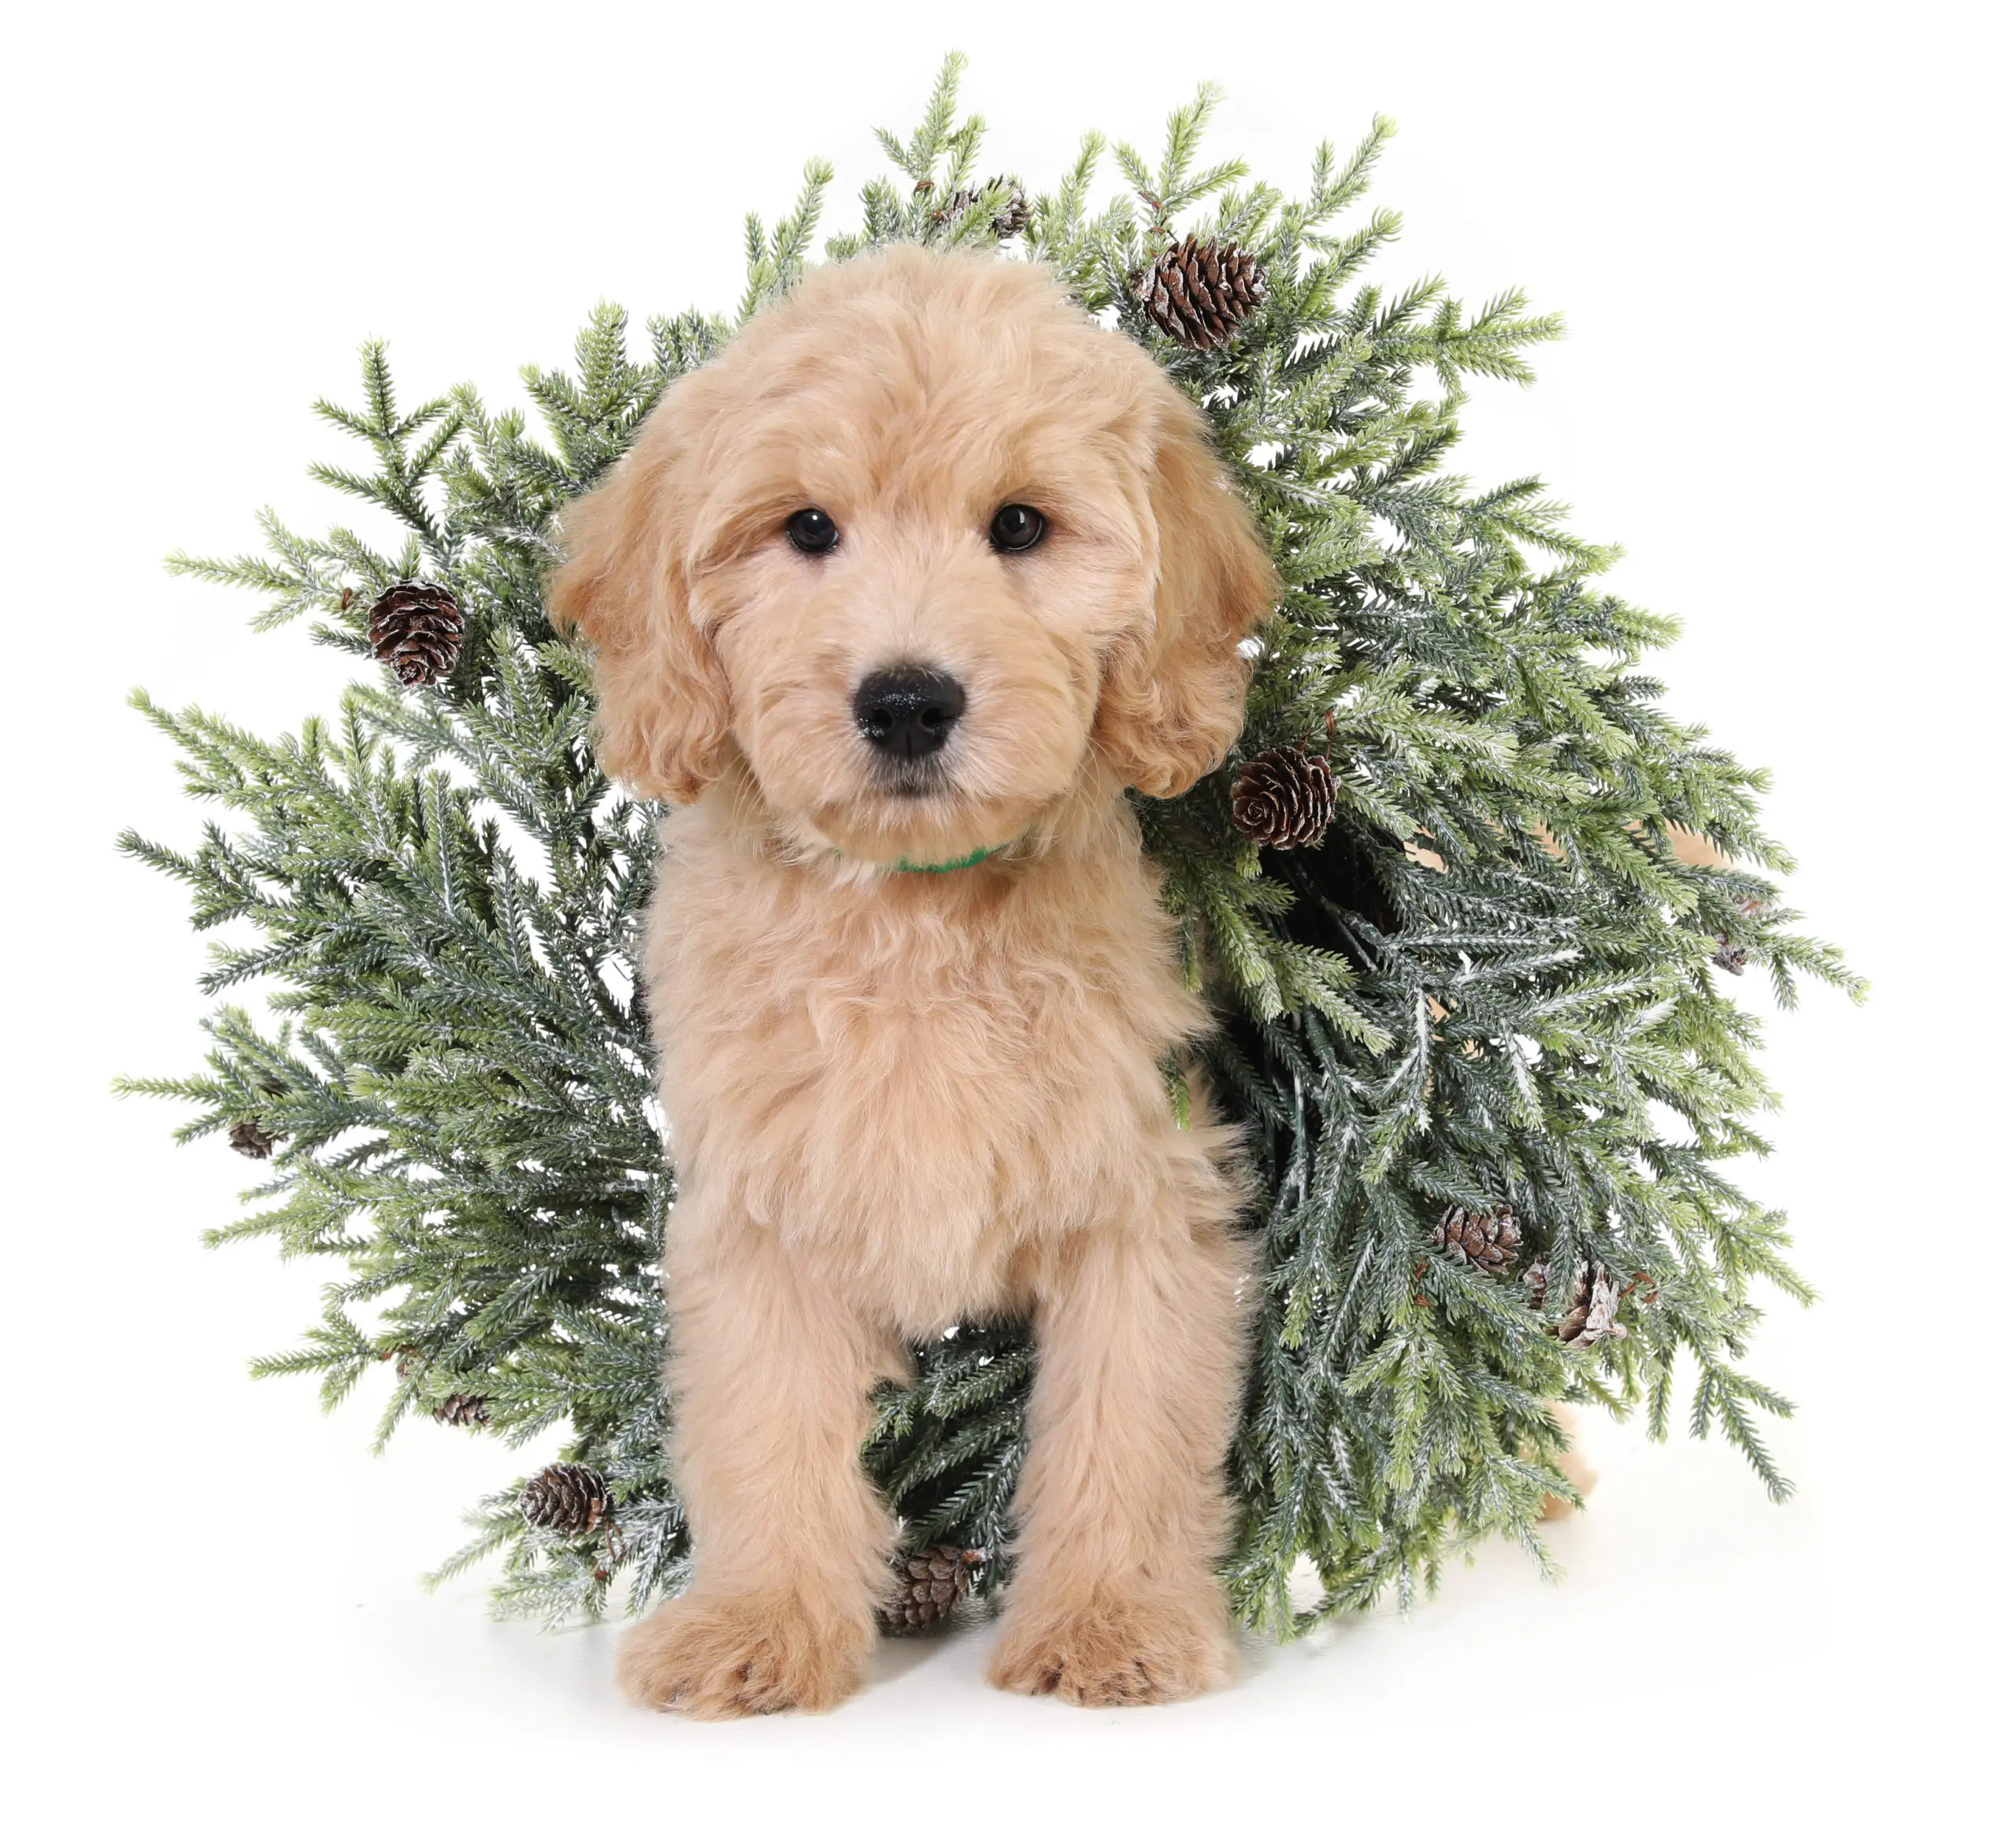 a miniature English teddy bear goldendoodle puppy with a Christmas wreath behind him